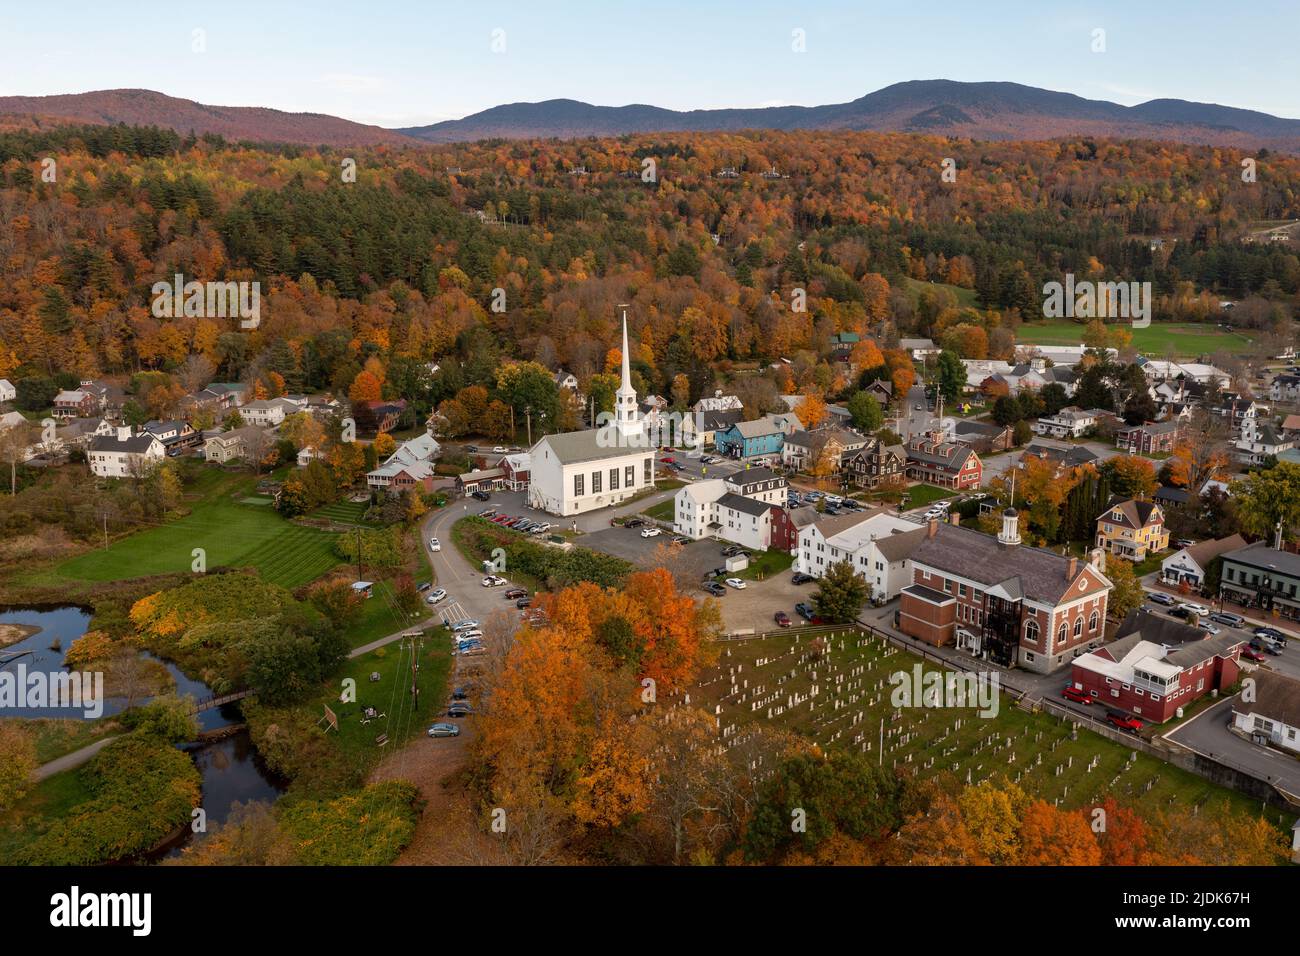 Stowe, Vermont - Oct 12, 2021: White Community Church in the famous ski town of Stowe in Vermont during the fall. Stock Photo